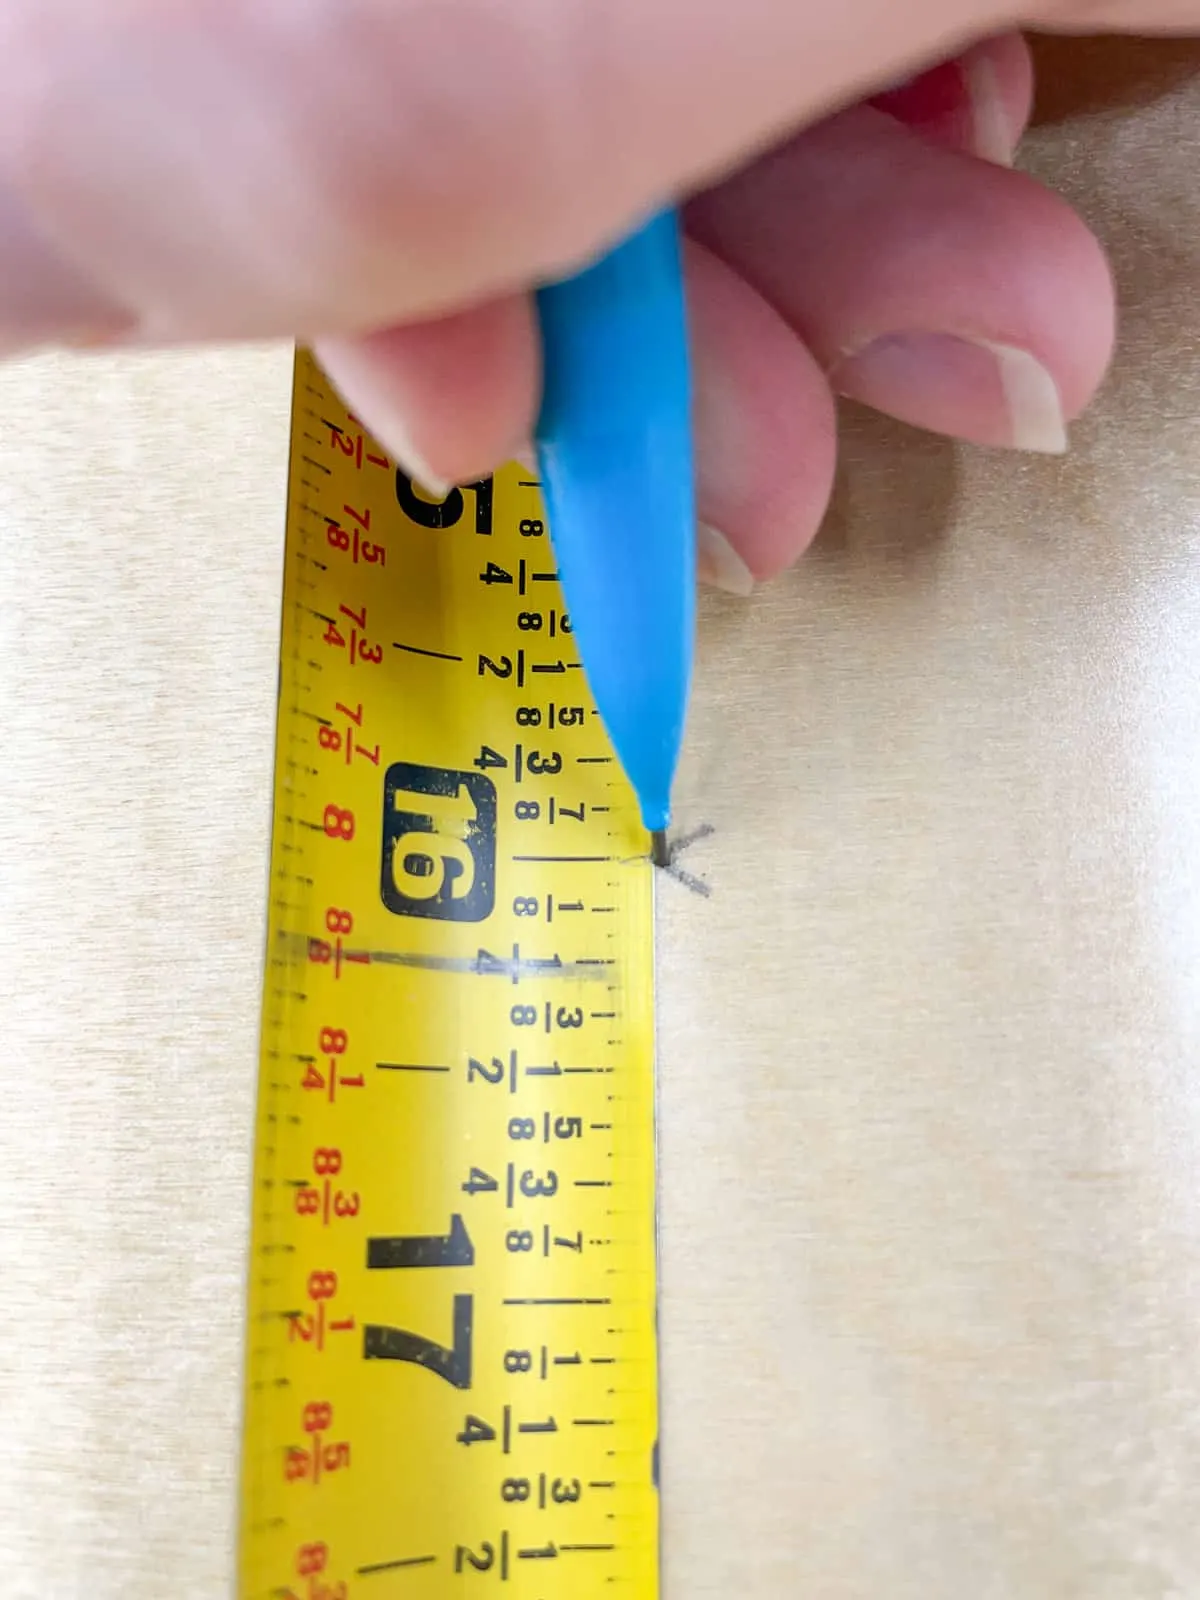 The Best Metric Tape Measures for 2022